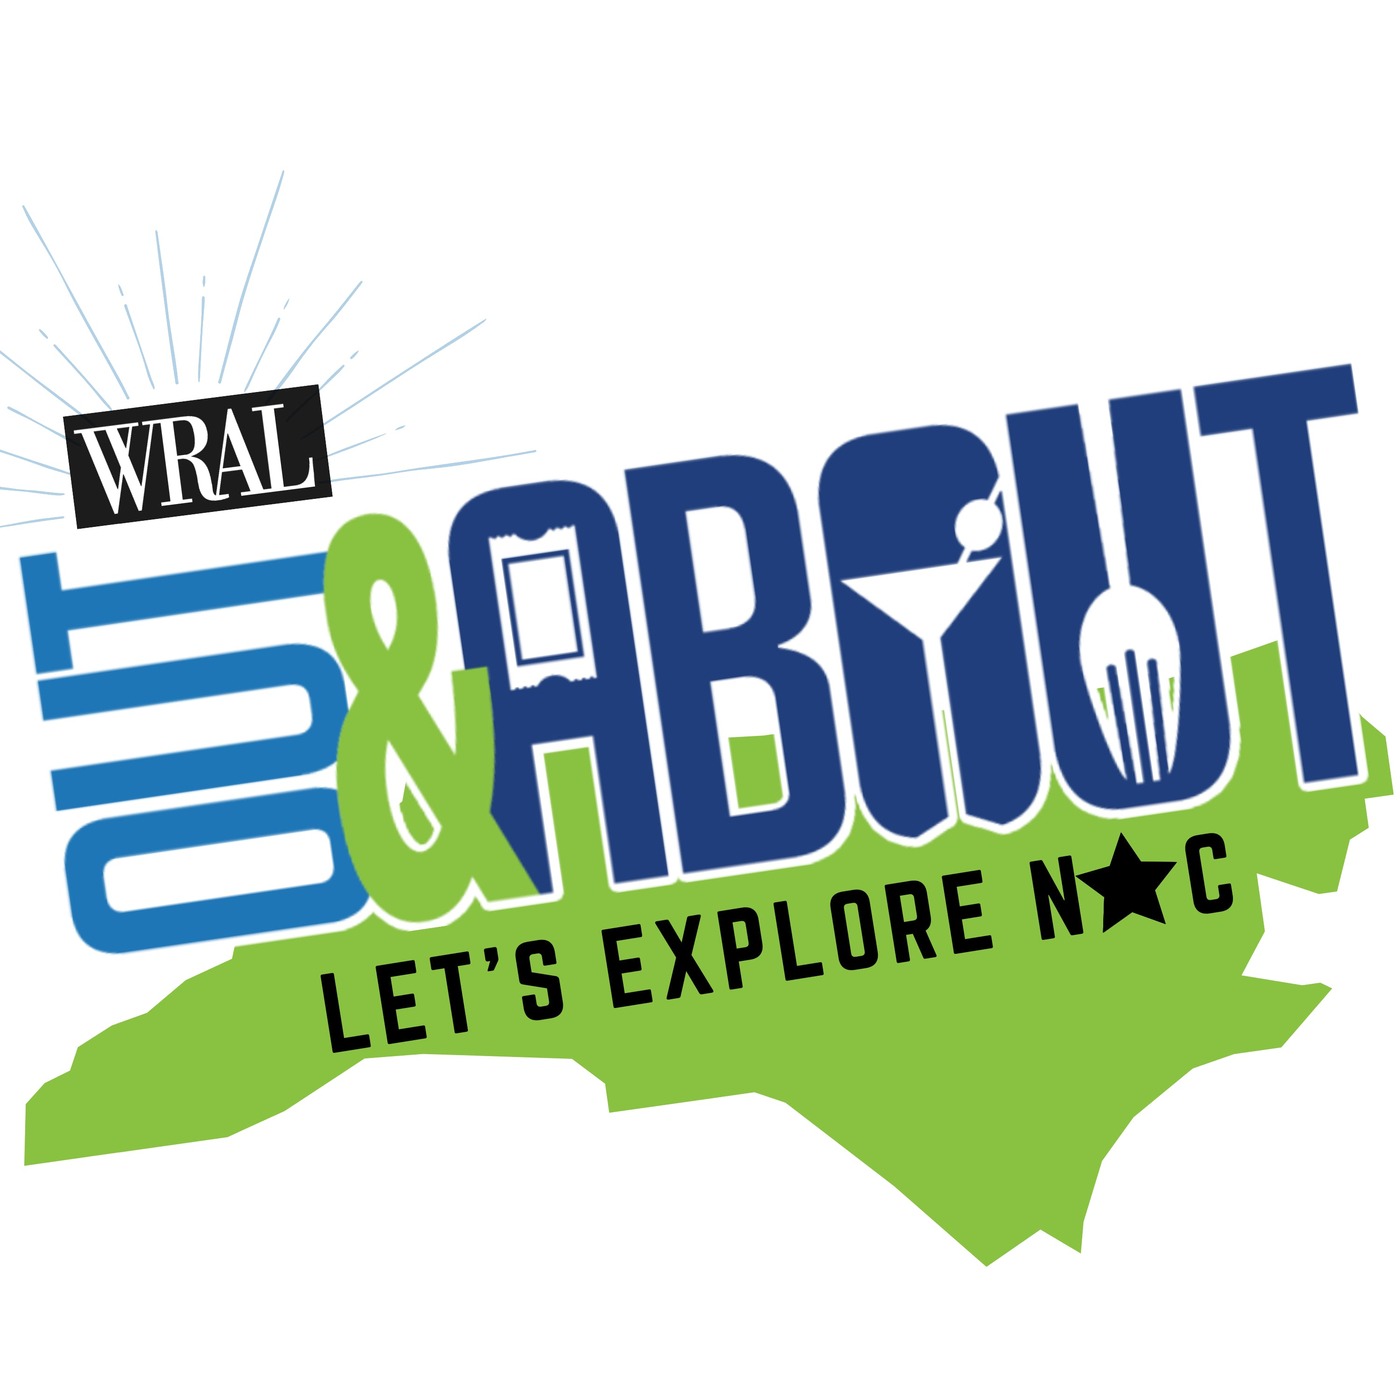 Ep. 231: Animate Raleigh, Tossing Trees: What's happening Jan. 5-7 in the Triangle